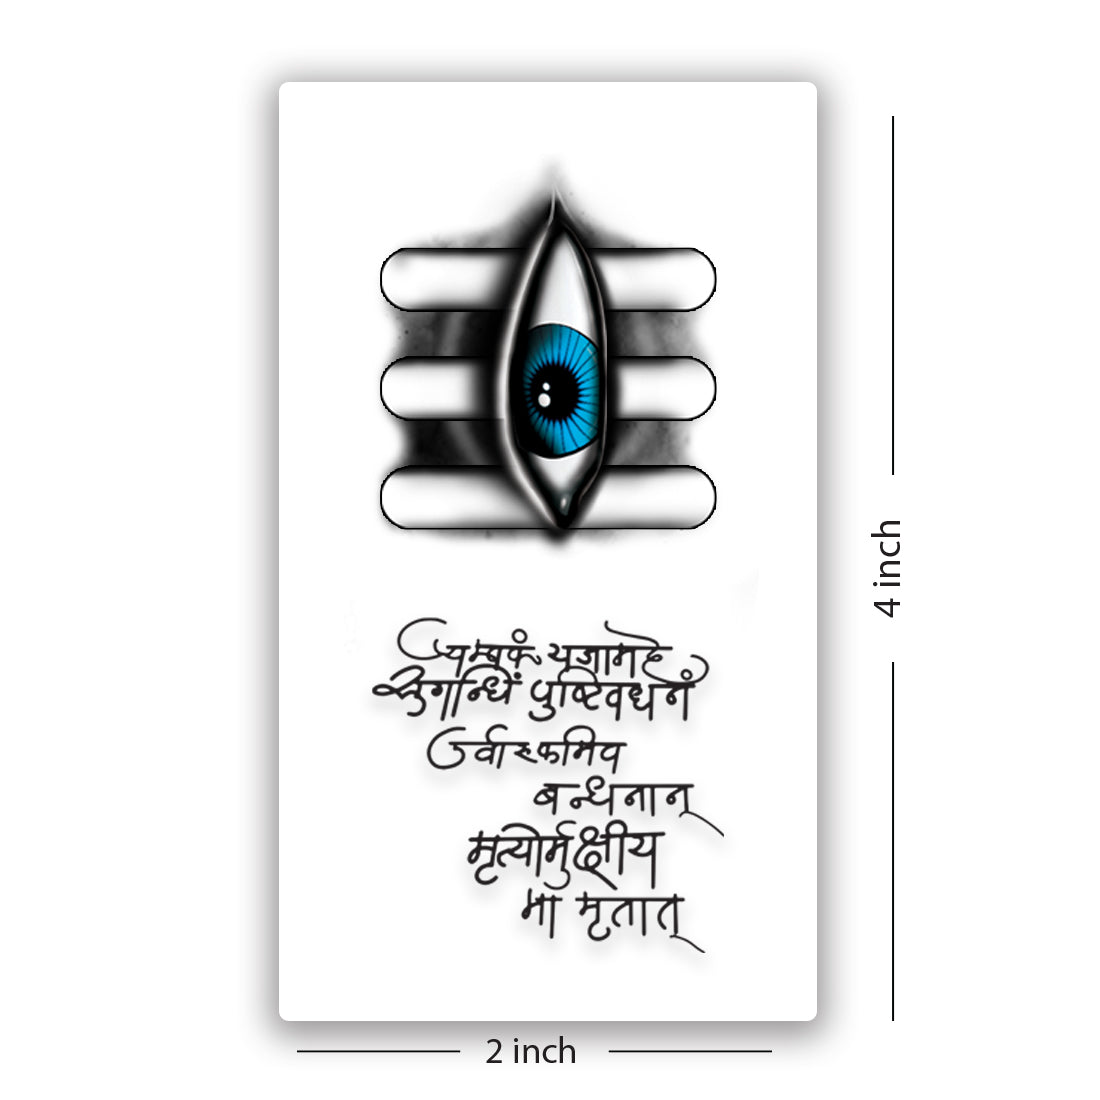 Details more than 154 tattoo for mahadev best